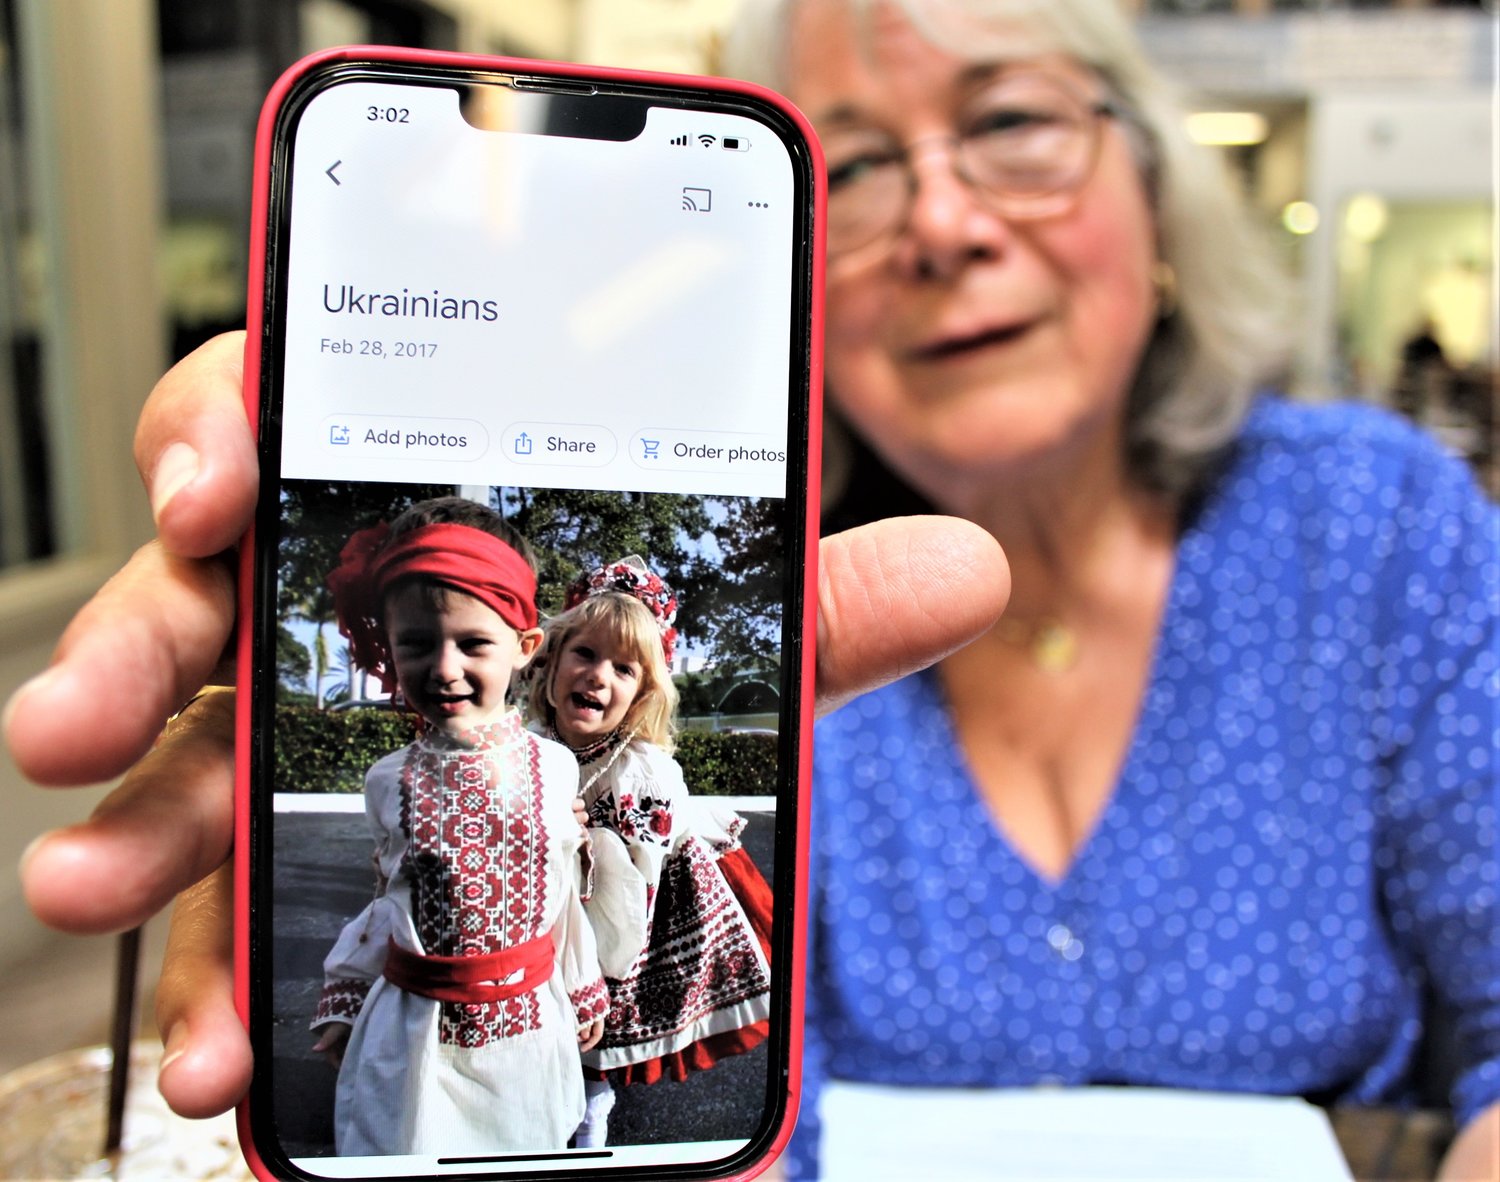 Cheri Sheridan shows off a picture of her grandkids in Ukrainian dress for a heritage day at their school. Sheridan was in the Marketplace Mall in Cortland on July 11.